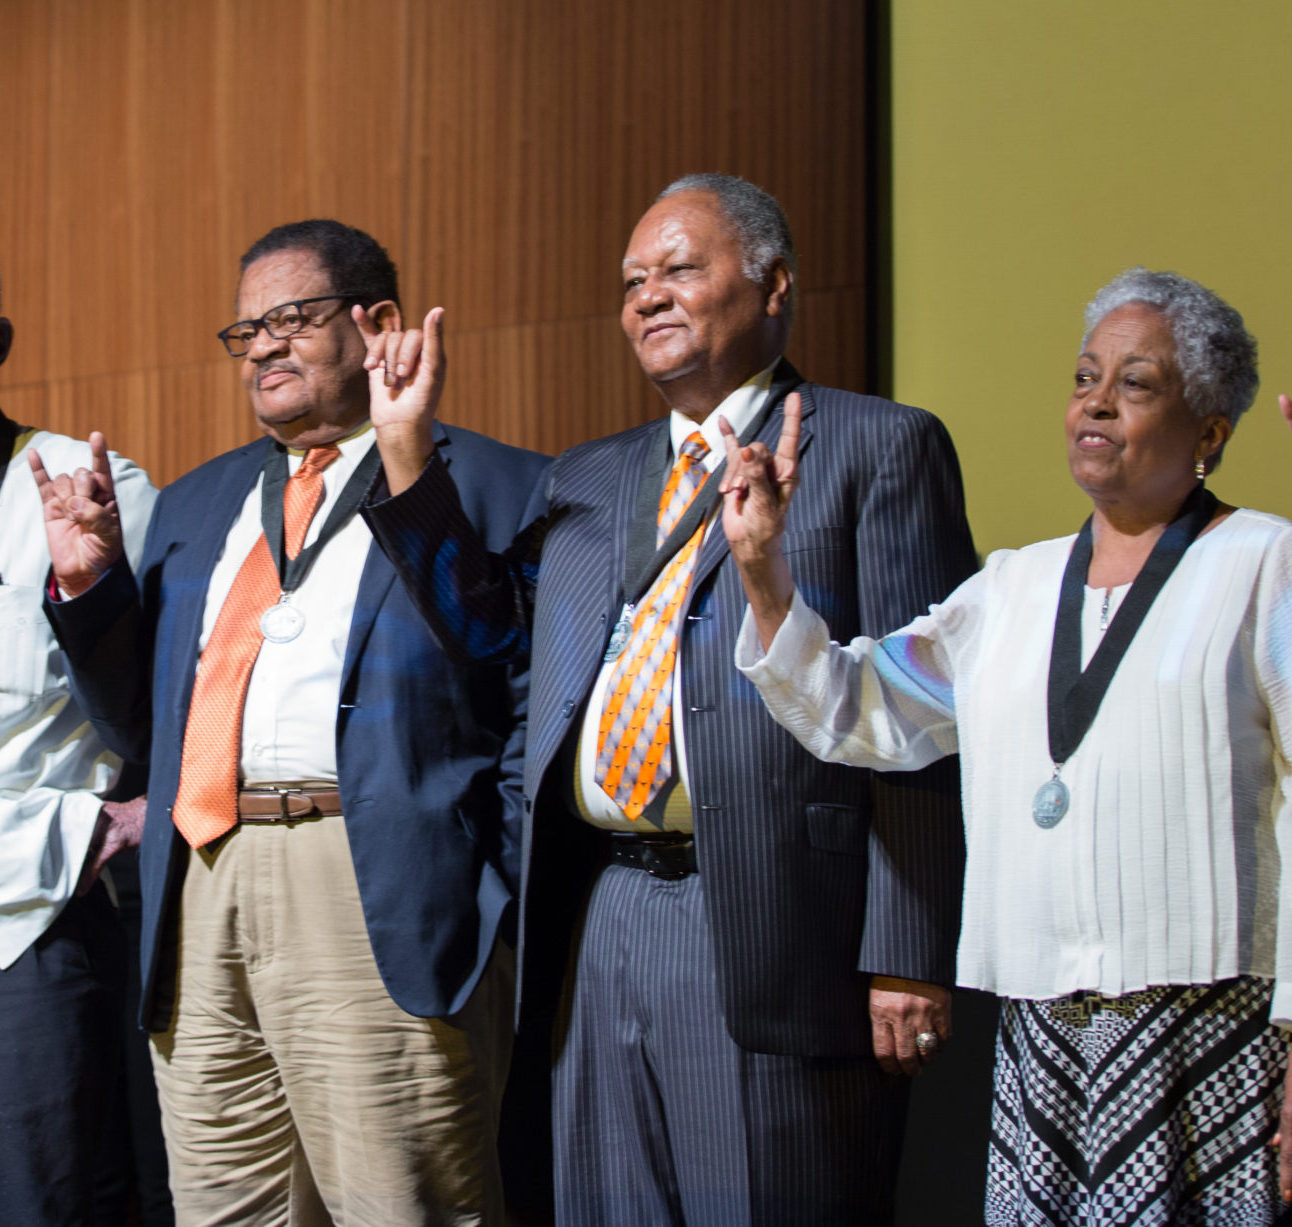 Willie C. Jordan Jr. (far left) raises his horns with a group of Precursors during the 60th anniversary celebration for the first Black undergraduates to enter UT Austin in 1956.